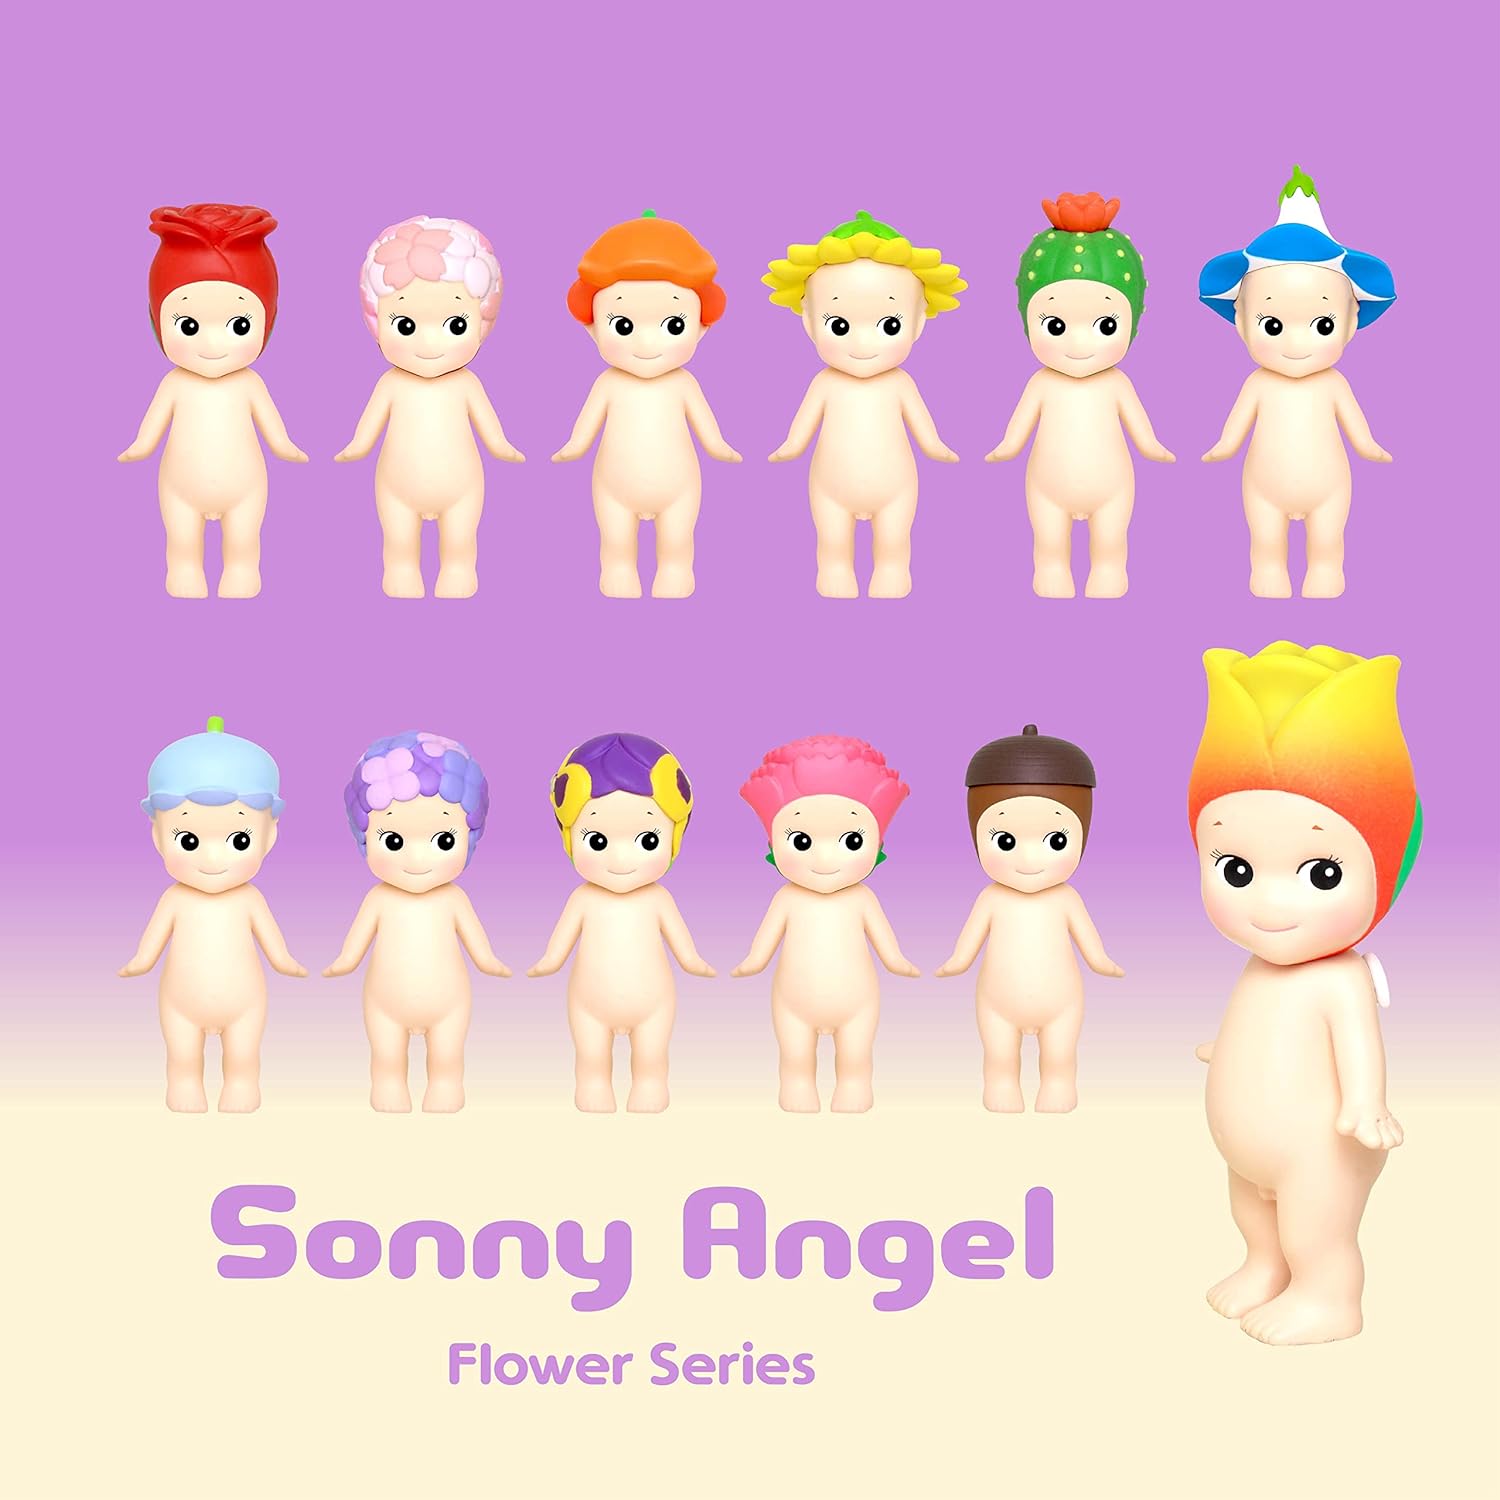 Sonny Angels Flower Series - A Child's Delight